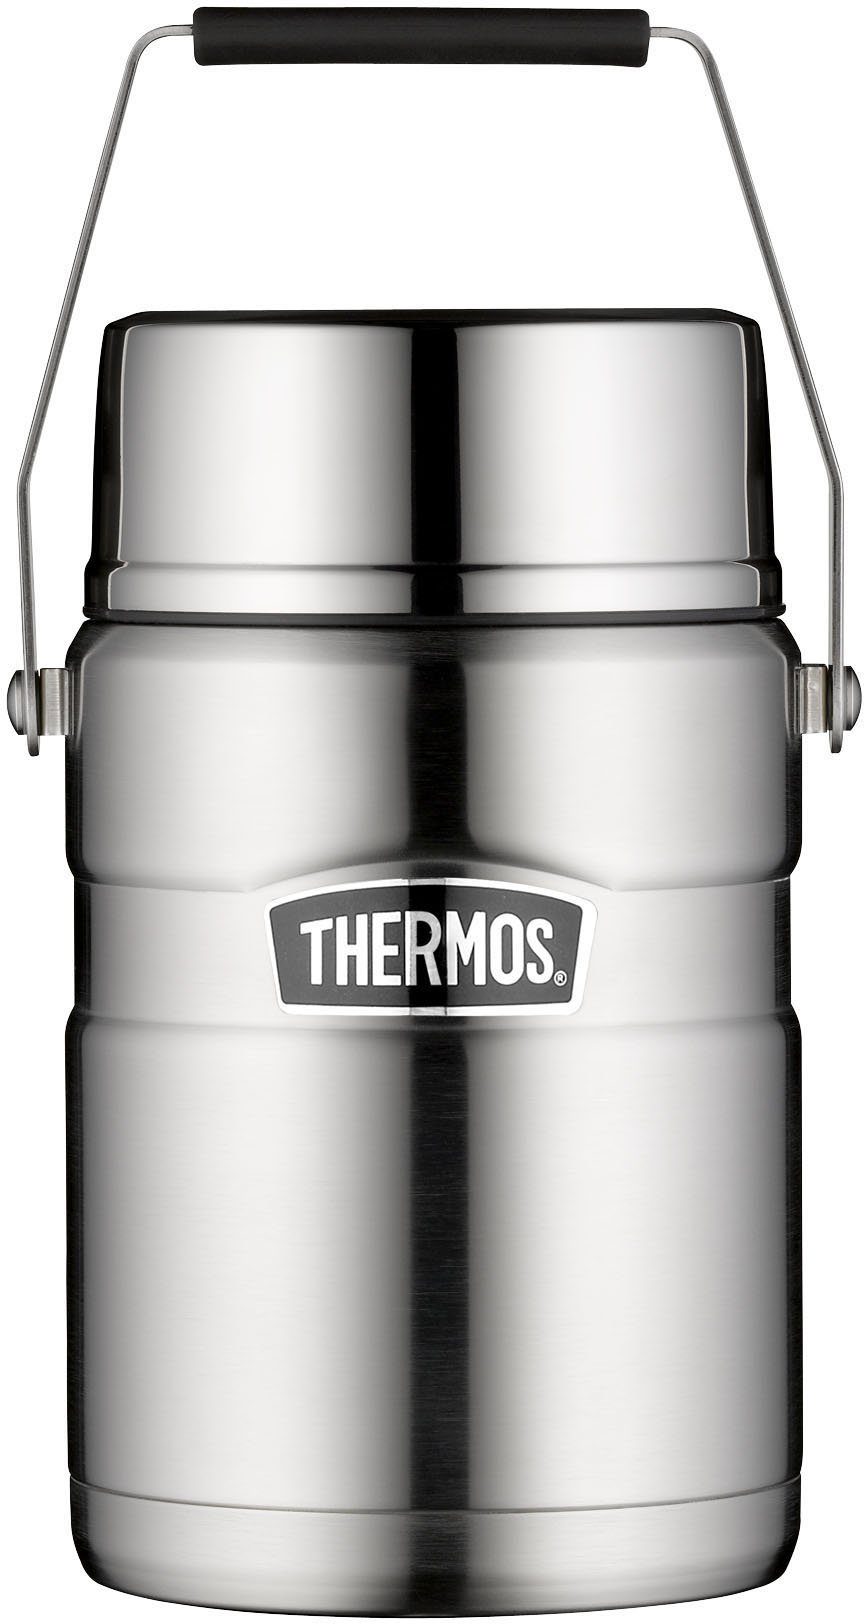 Thermobehälter King, THERMOS Edelstahl, 1,2 Liter (1-tlg), Stainless